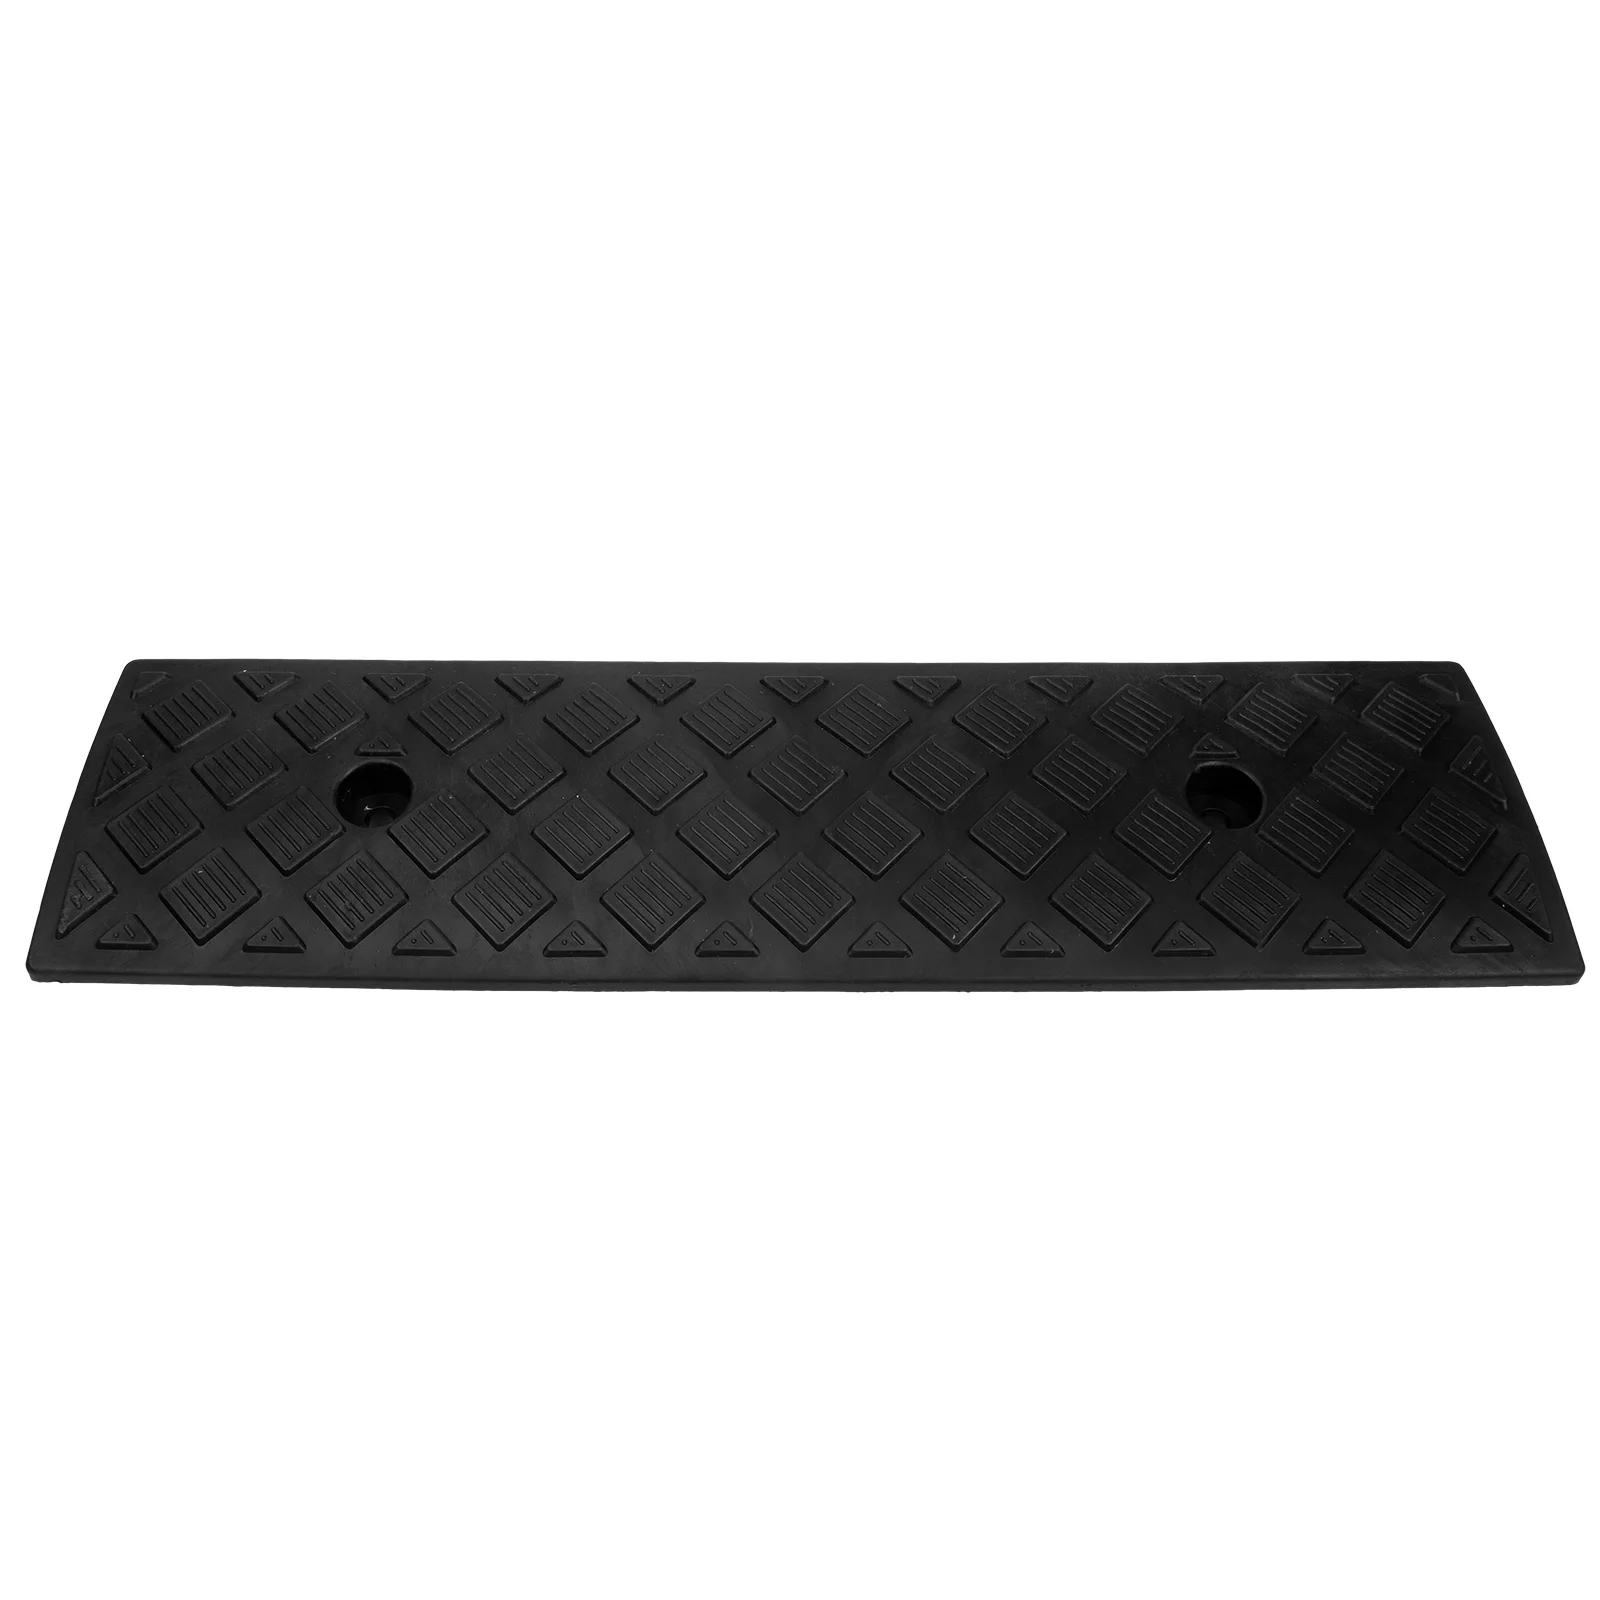 

Step Mat Slope Car Curb Ramp Plastic Speed Bumps Loading Rubber Shed Automatic Lawn Mower Bike Skateboard Threshold